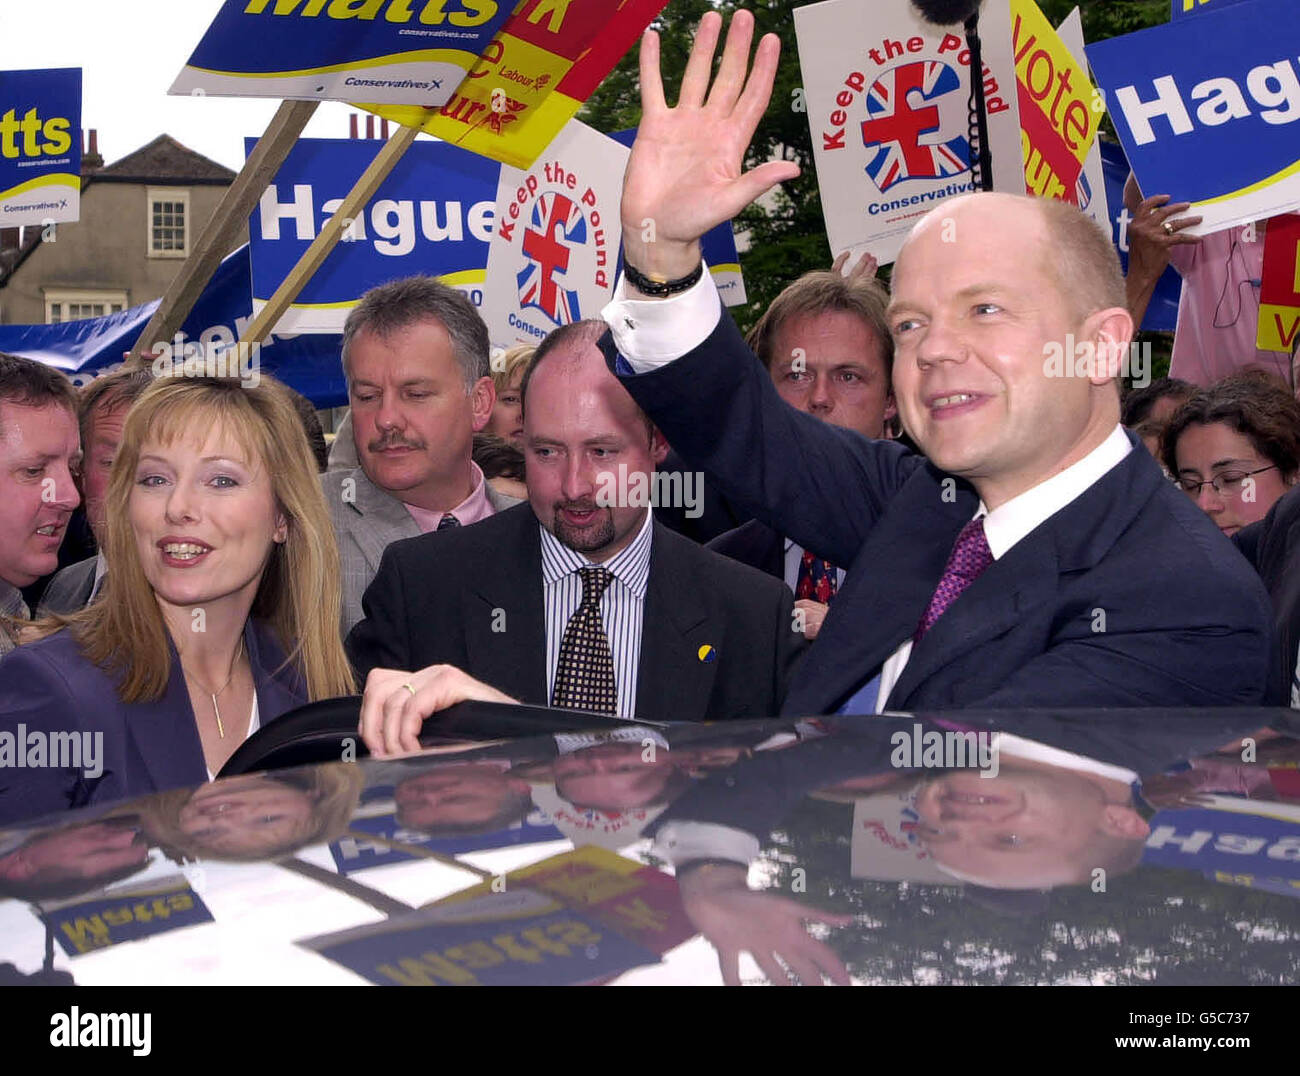 Conservative Party leader William Hague and wife Ffion with the assembled crowd in Abingdon Market Square, Oxfordshire, while on the General Election campaign trial. Stock Photo